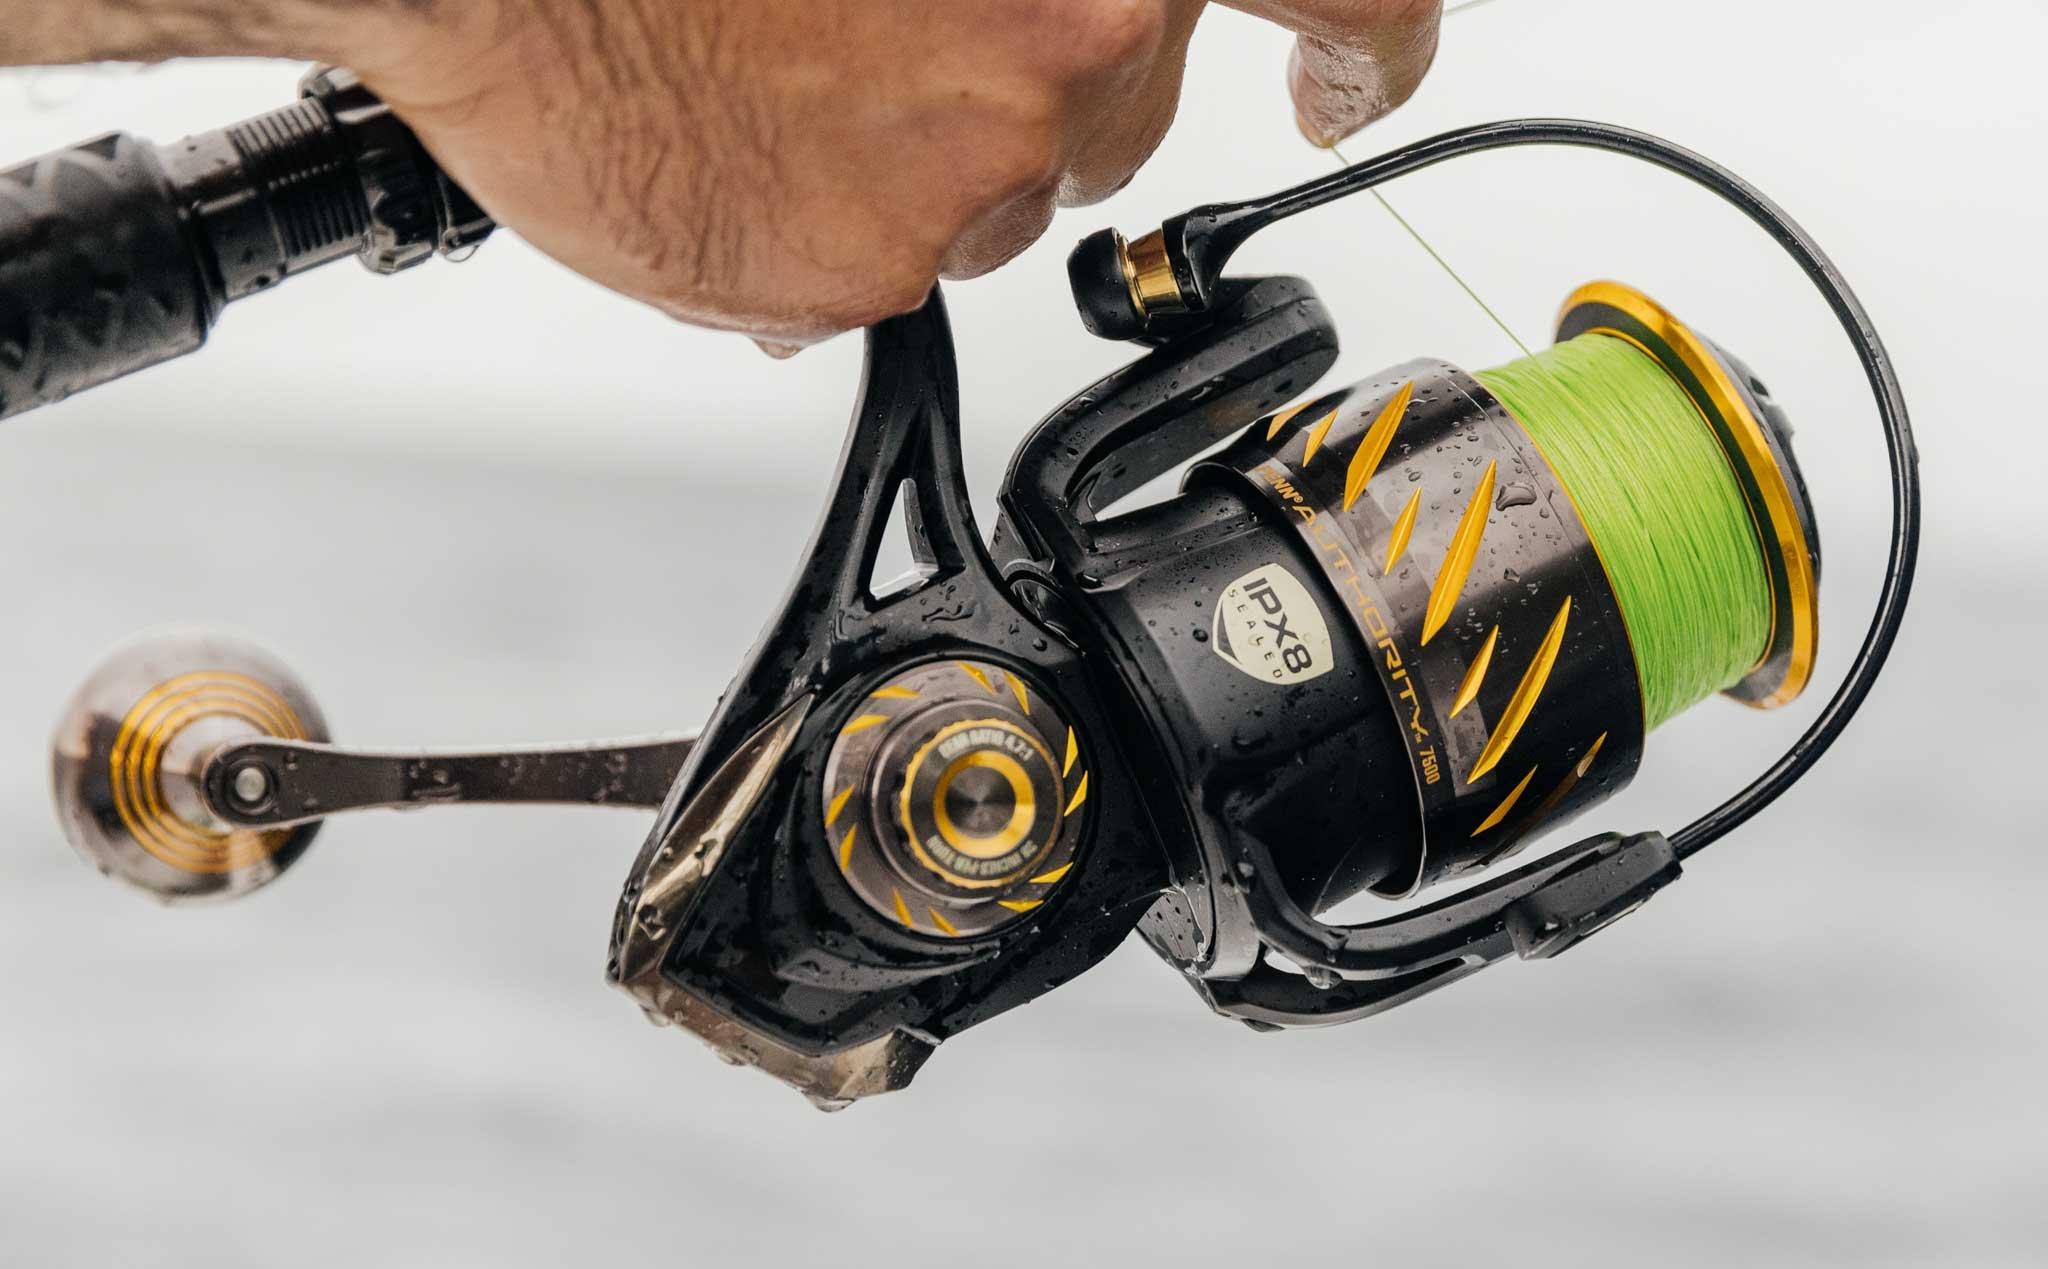 Fishing tackle from the world's most trusted fishing gear brands